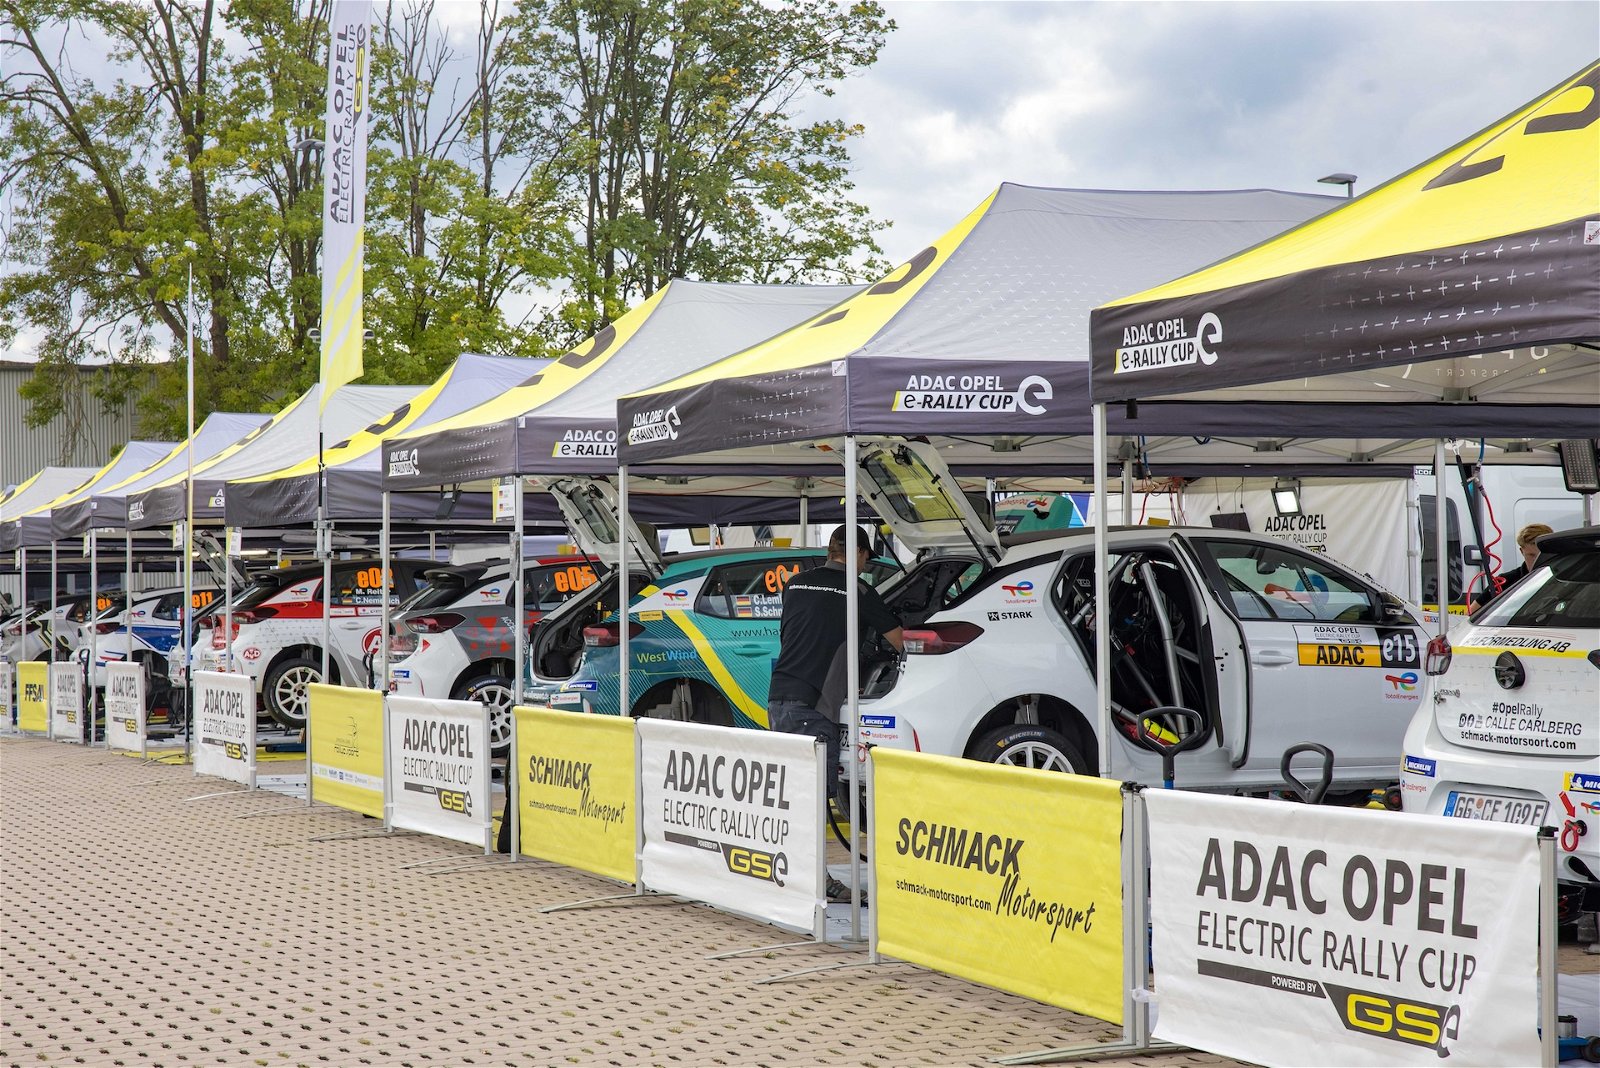 ADAC-Opel-Electric-Rally-Cup-Laden